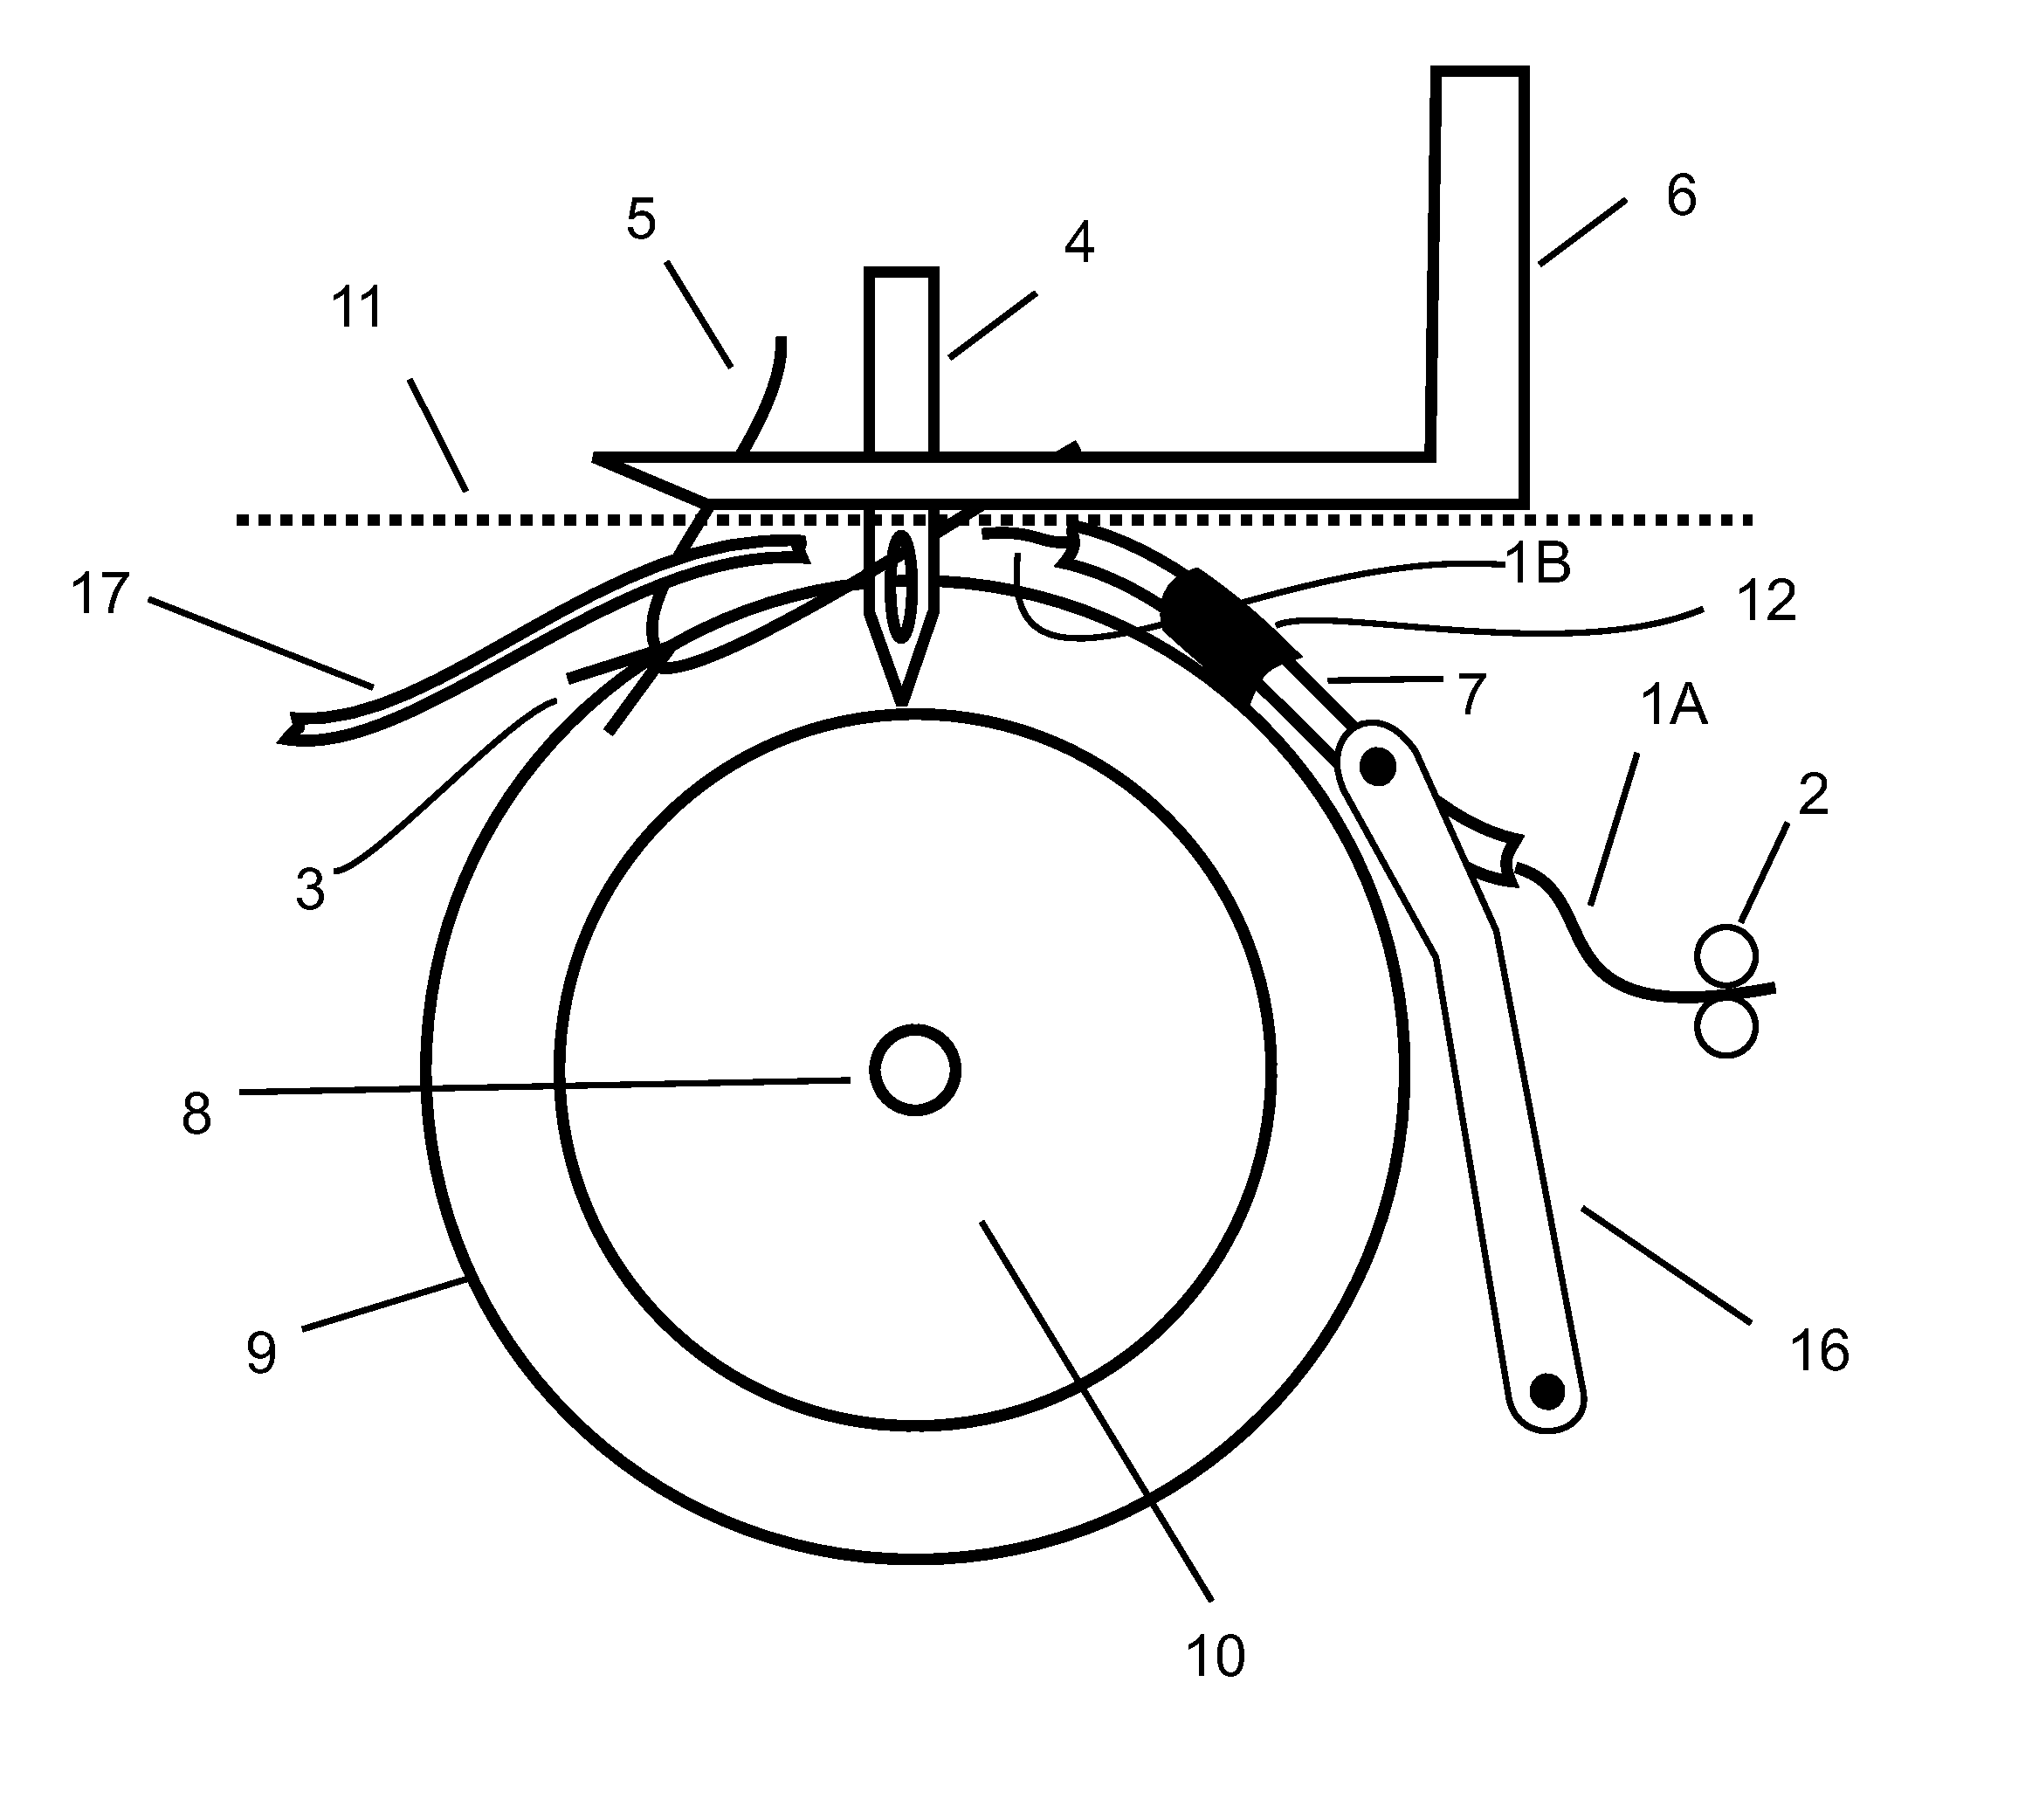 Spool-less, continuous bobbin assembly and method of use